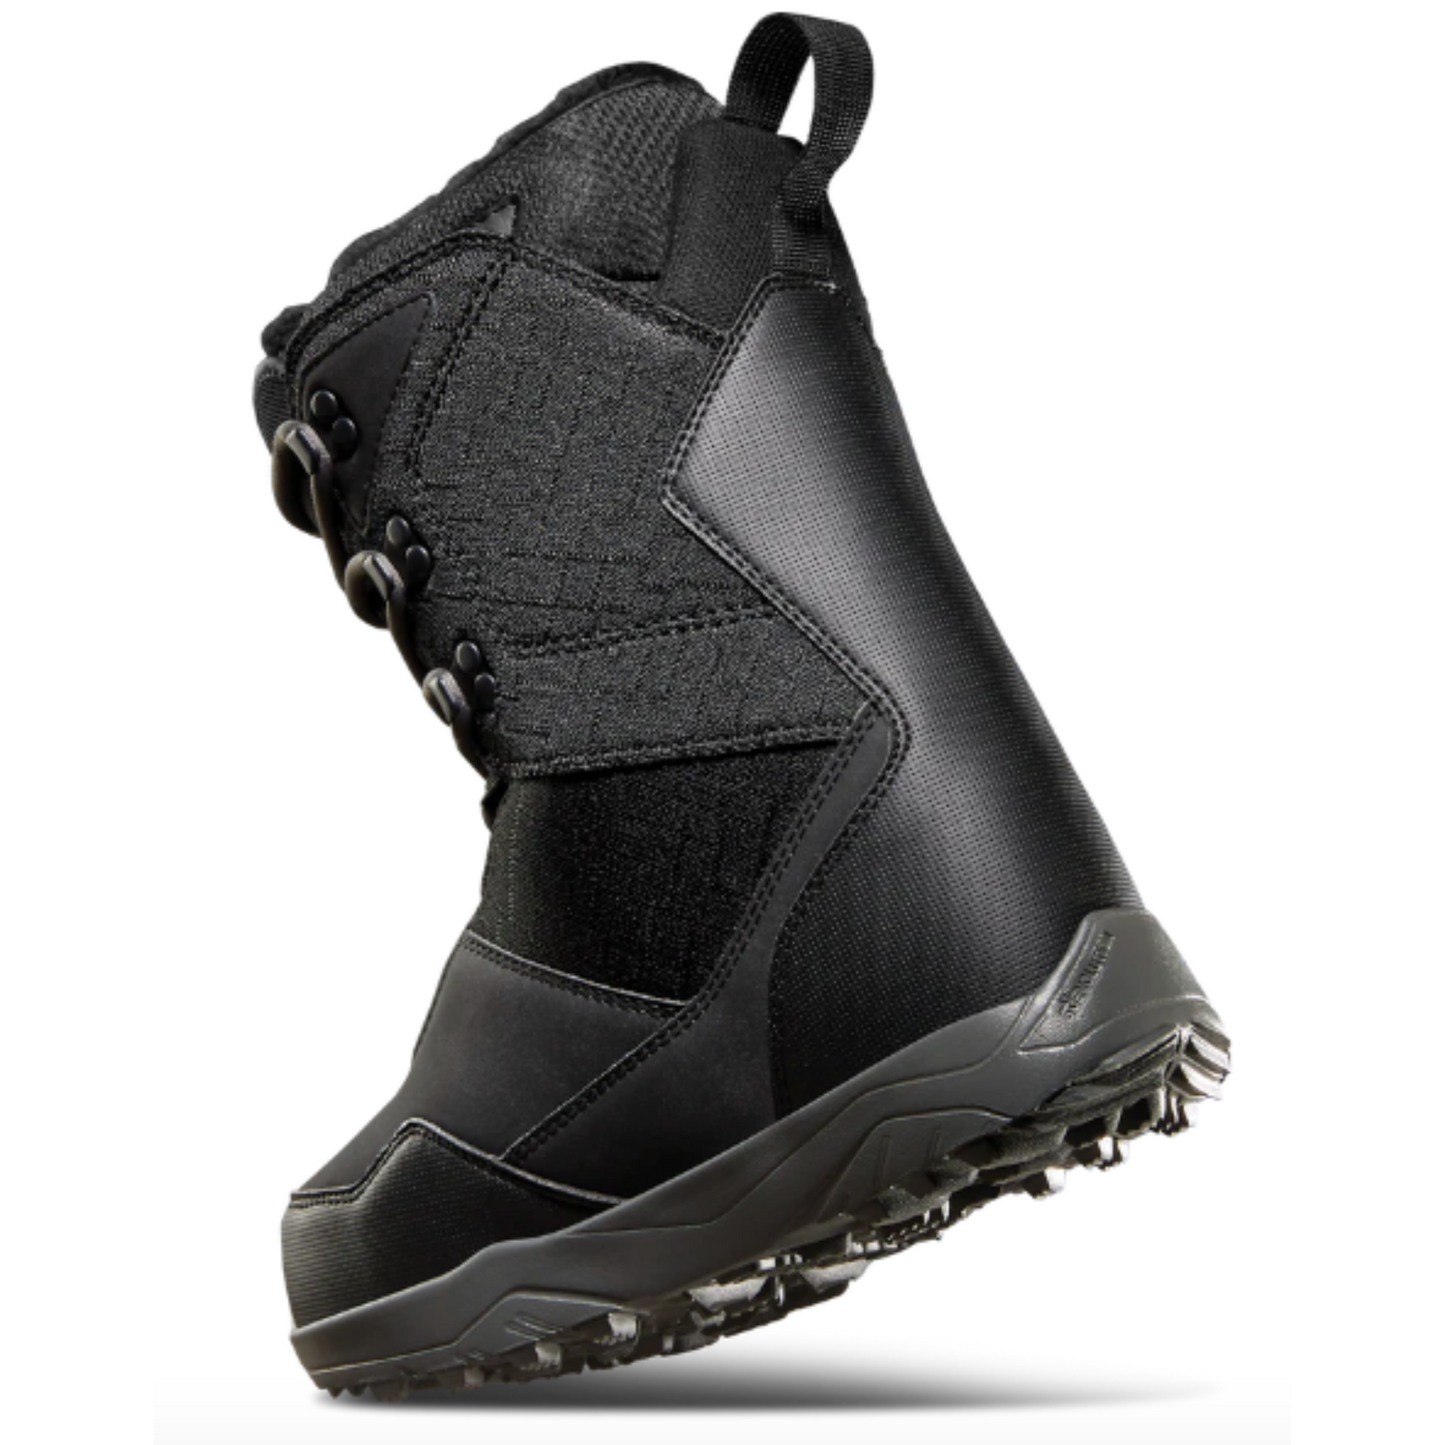 ThirtyTwo Women's Shifty Lace Snowboard Boots in Black